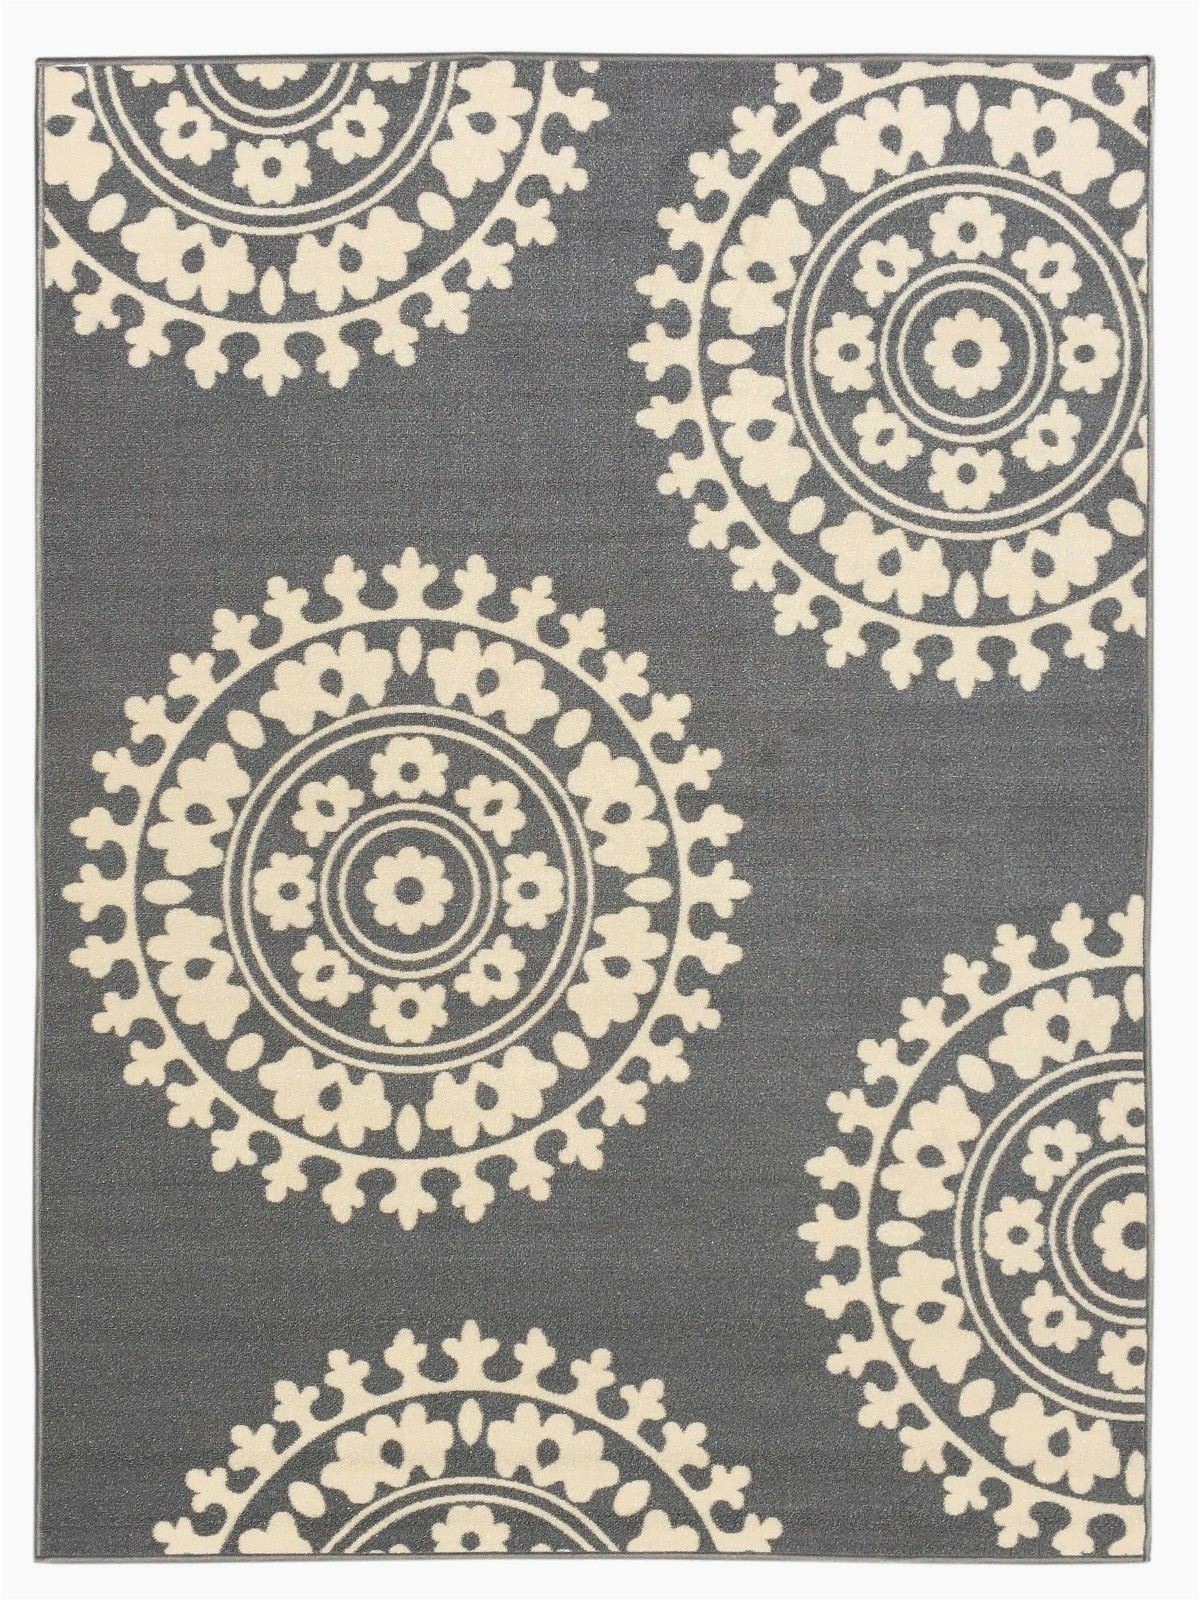 4 X 6 Rubber Backed area Rugs Rubber Backed Non Skid Non Slip Gray Ivory Color Medallion Design area Rug